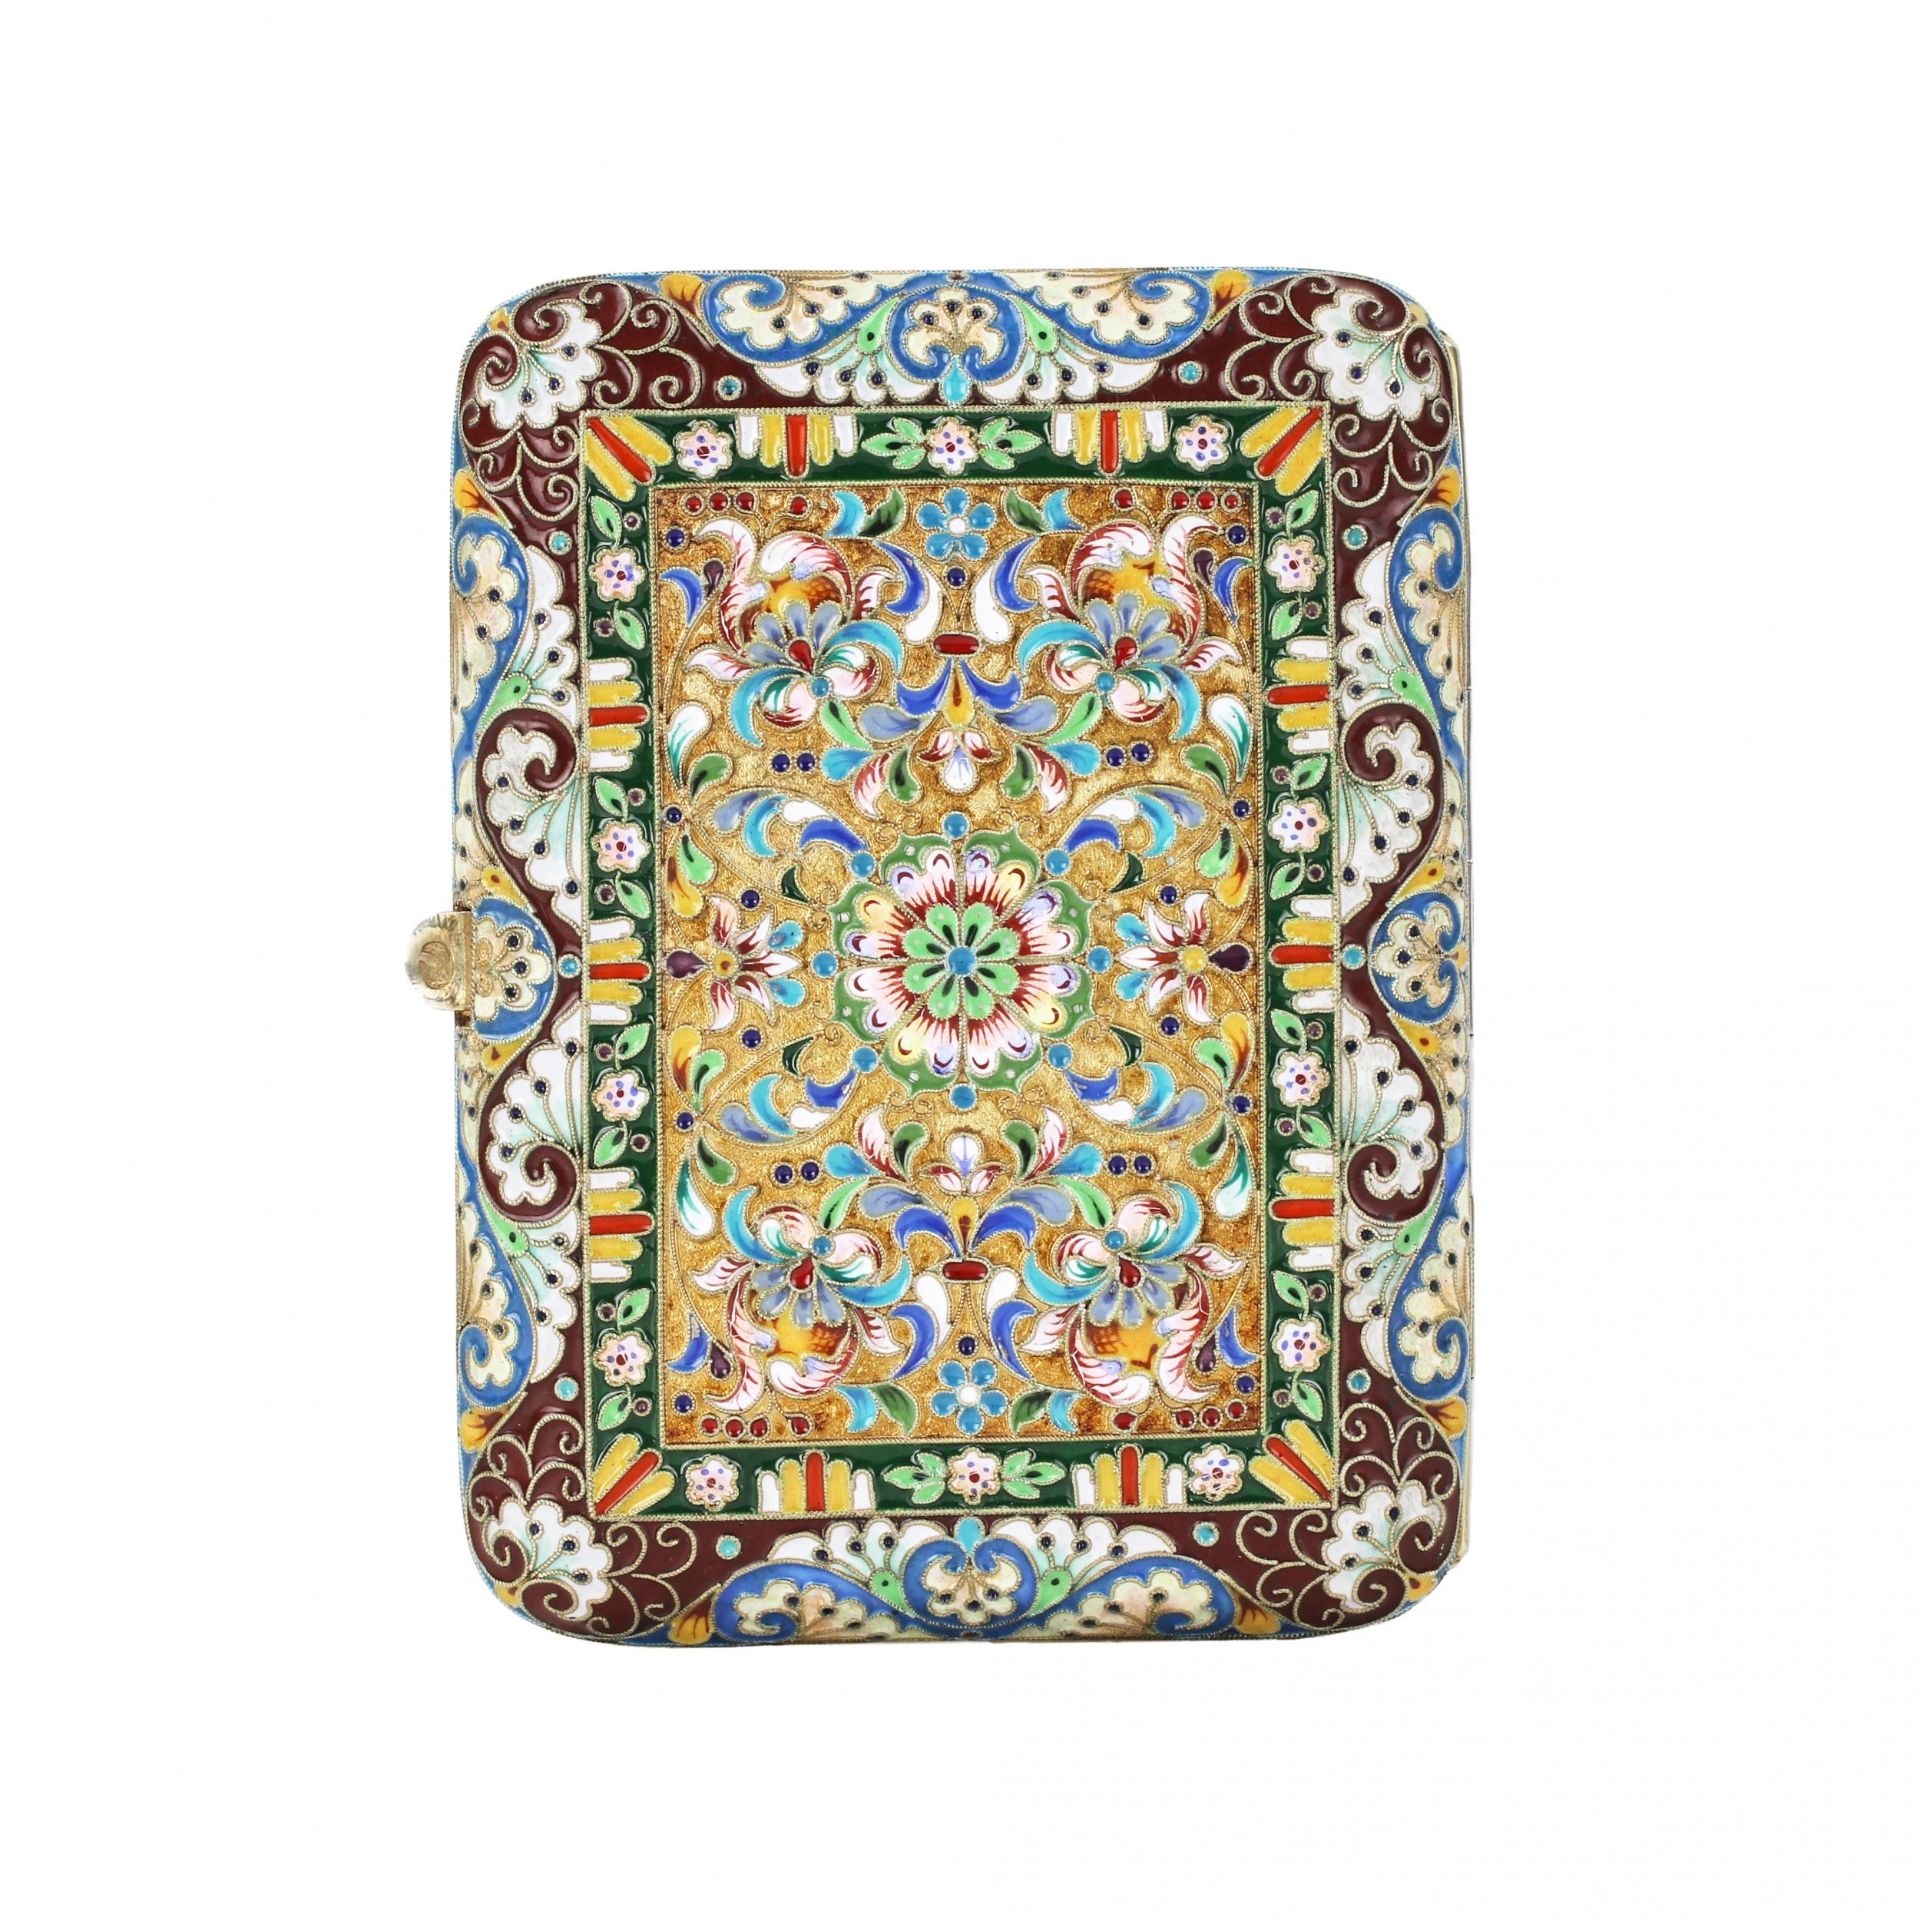 Silver cigarette case with gilding and cloisonne enamel. - Image 3 of 8